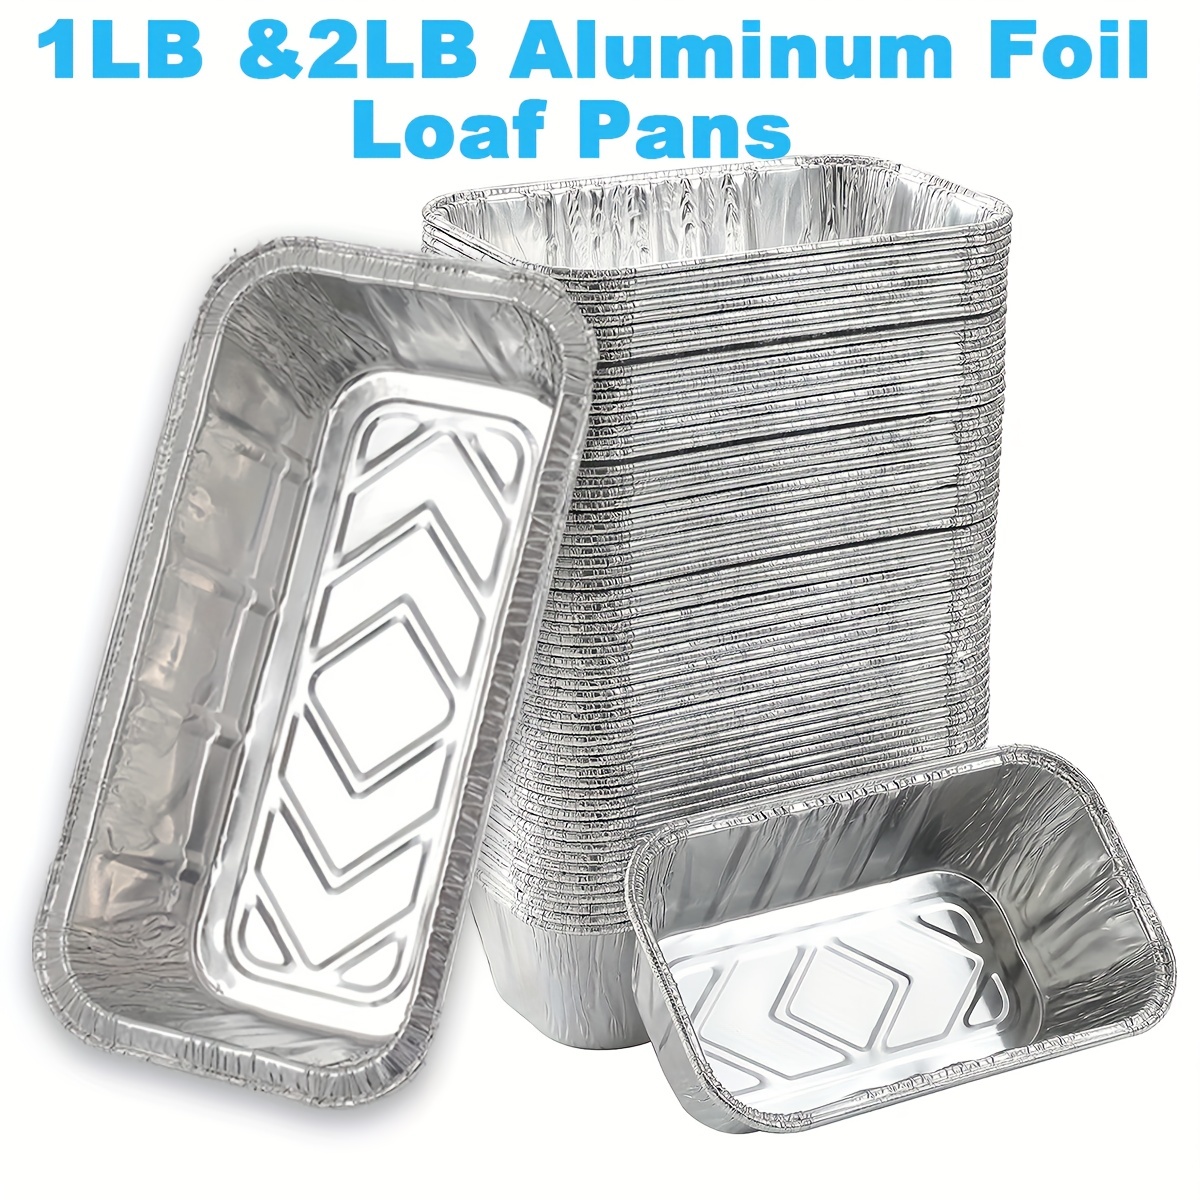 Jumbo size Extra Large Silver Foil Metallic Cupcake Baking Cups  2-3/4(Bottom) x2(Deep) paper muffin liners 200 pcs per case(200 Silver  Foil) 